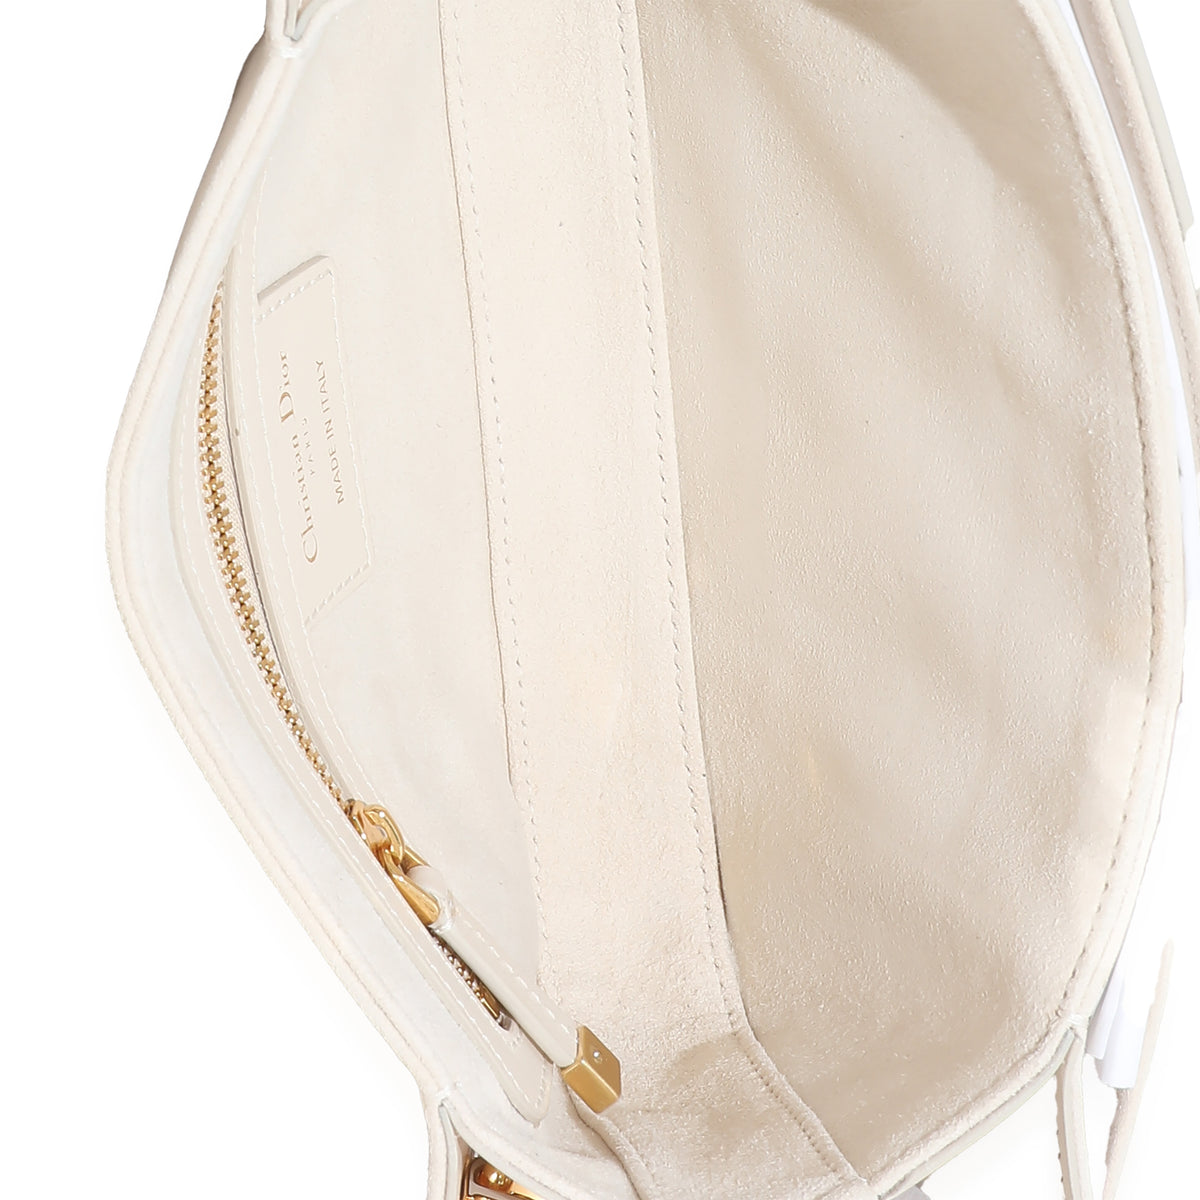 Christian Dior Bucket Bag Cream Grained Leather Small Shoulder Bag